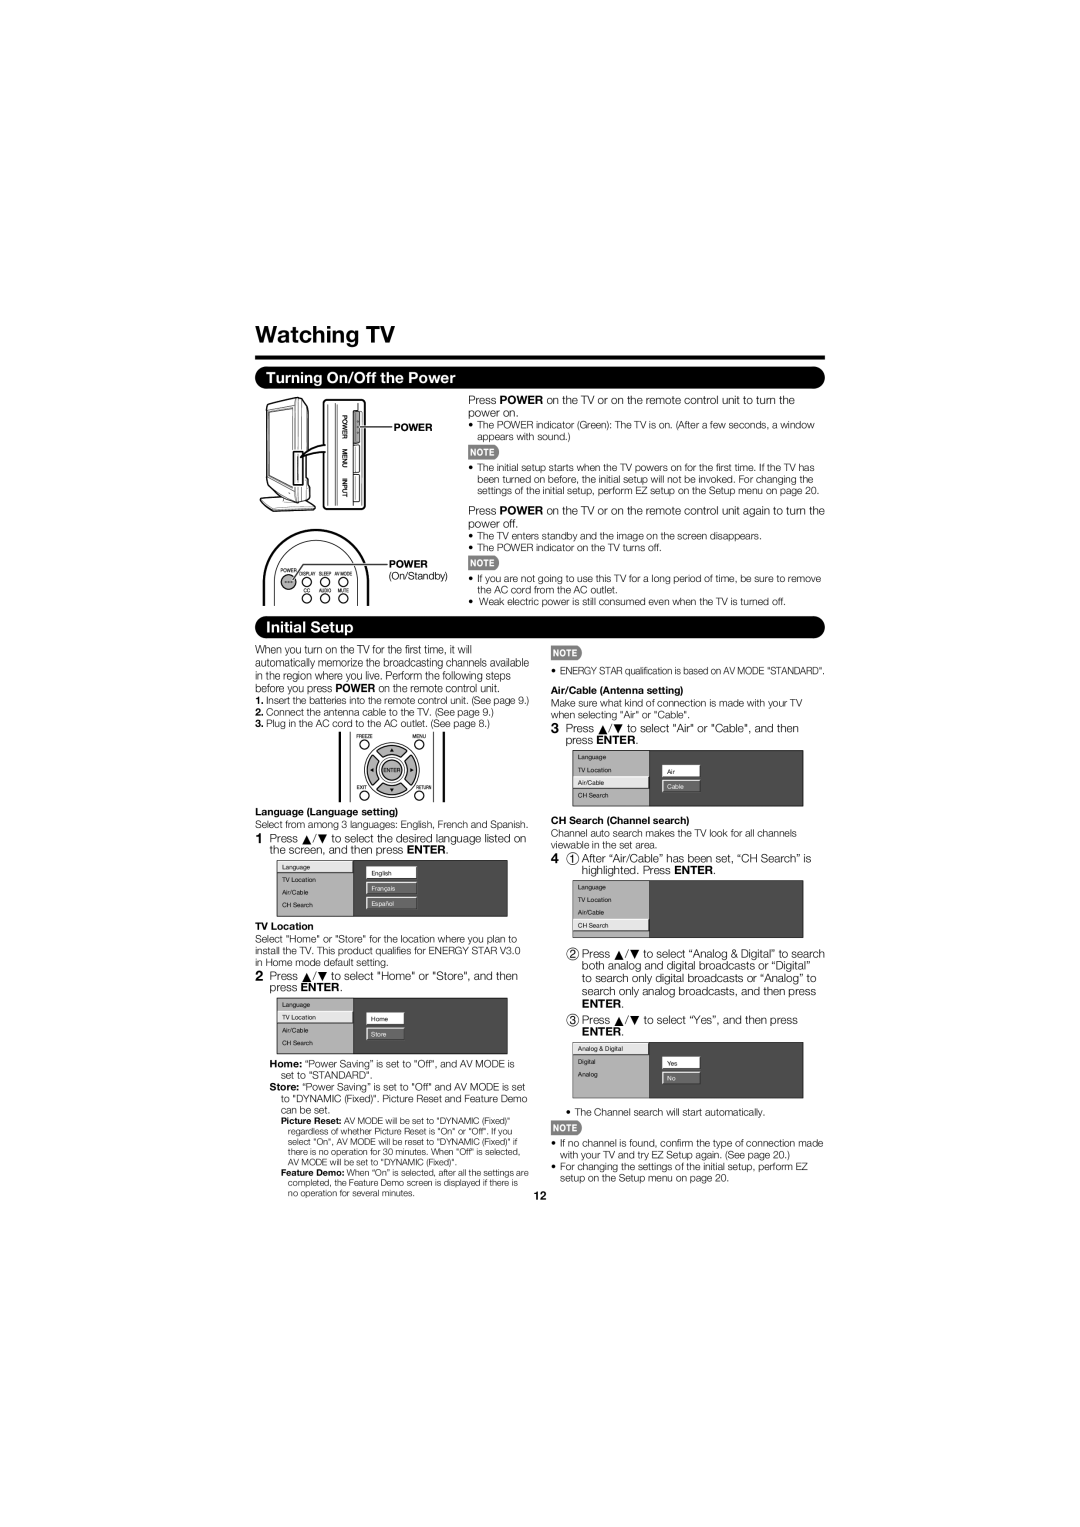 Sharp LC32D47UT operation manual Watching TV, Turning On/Off the Power, Initial Setup, Enter 